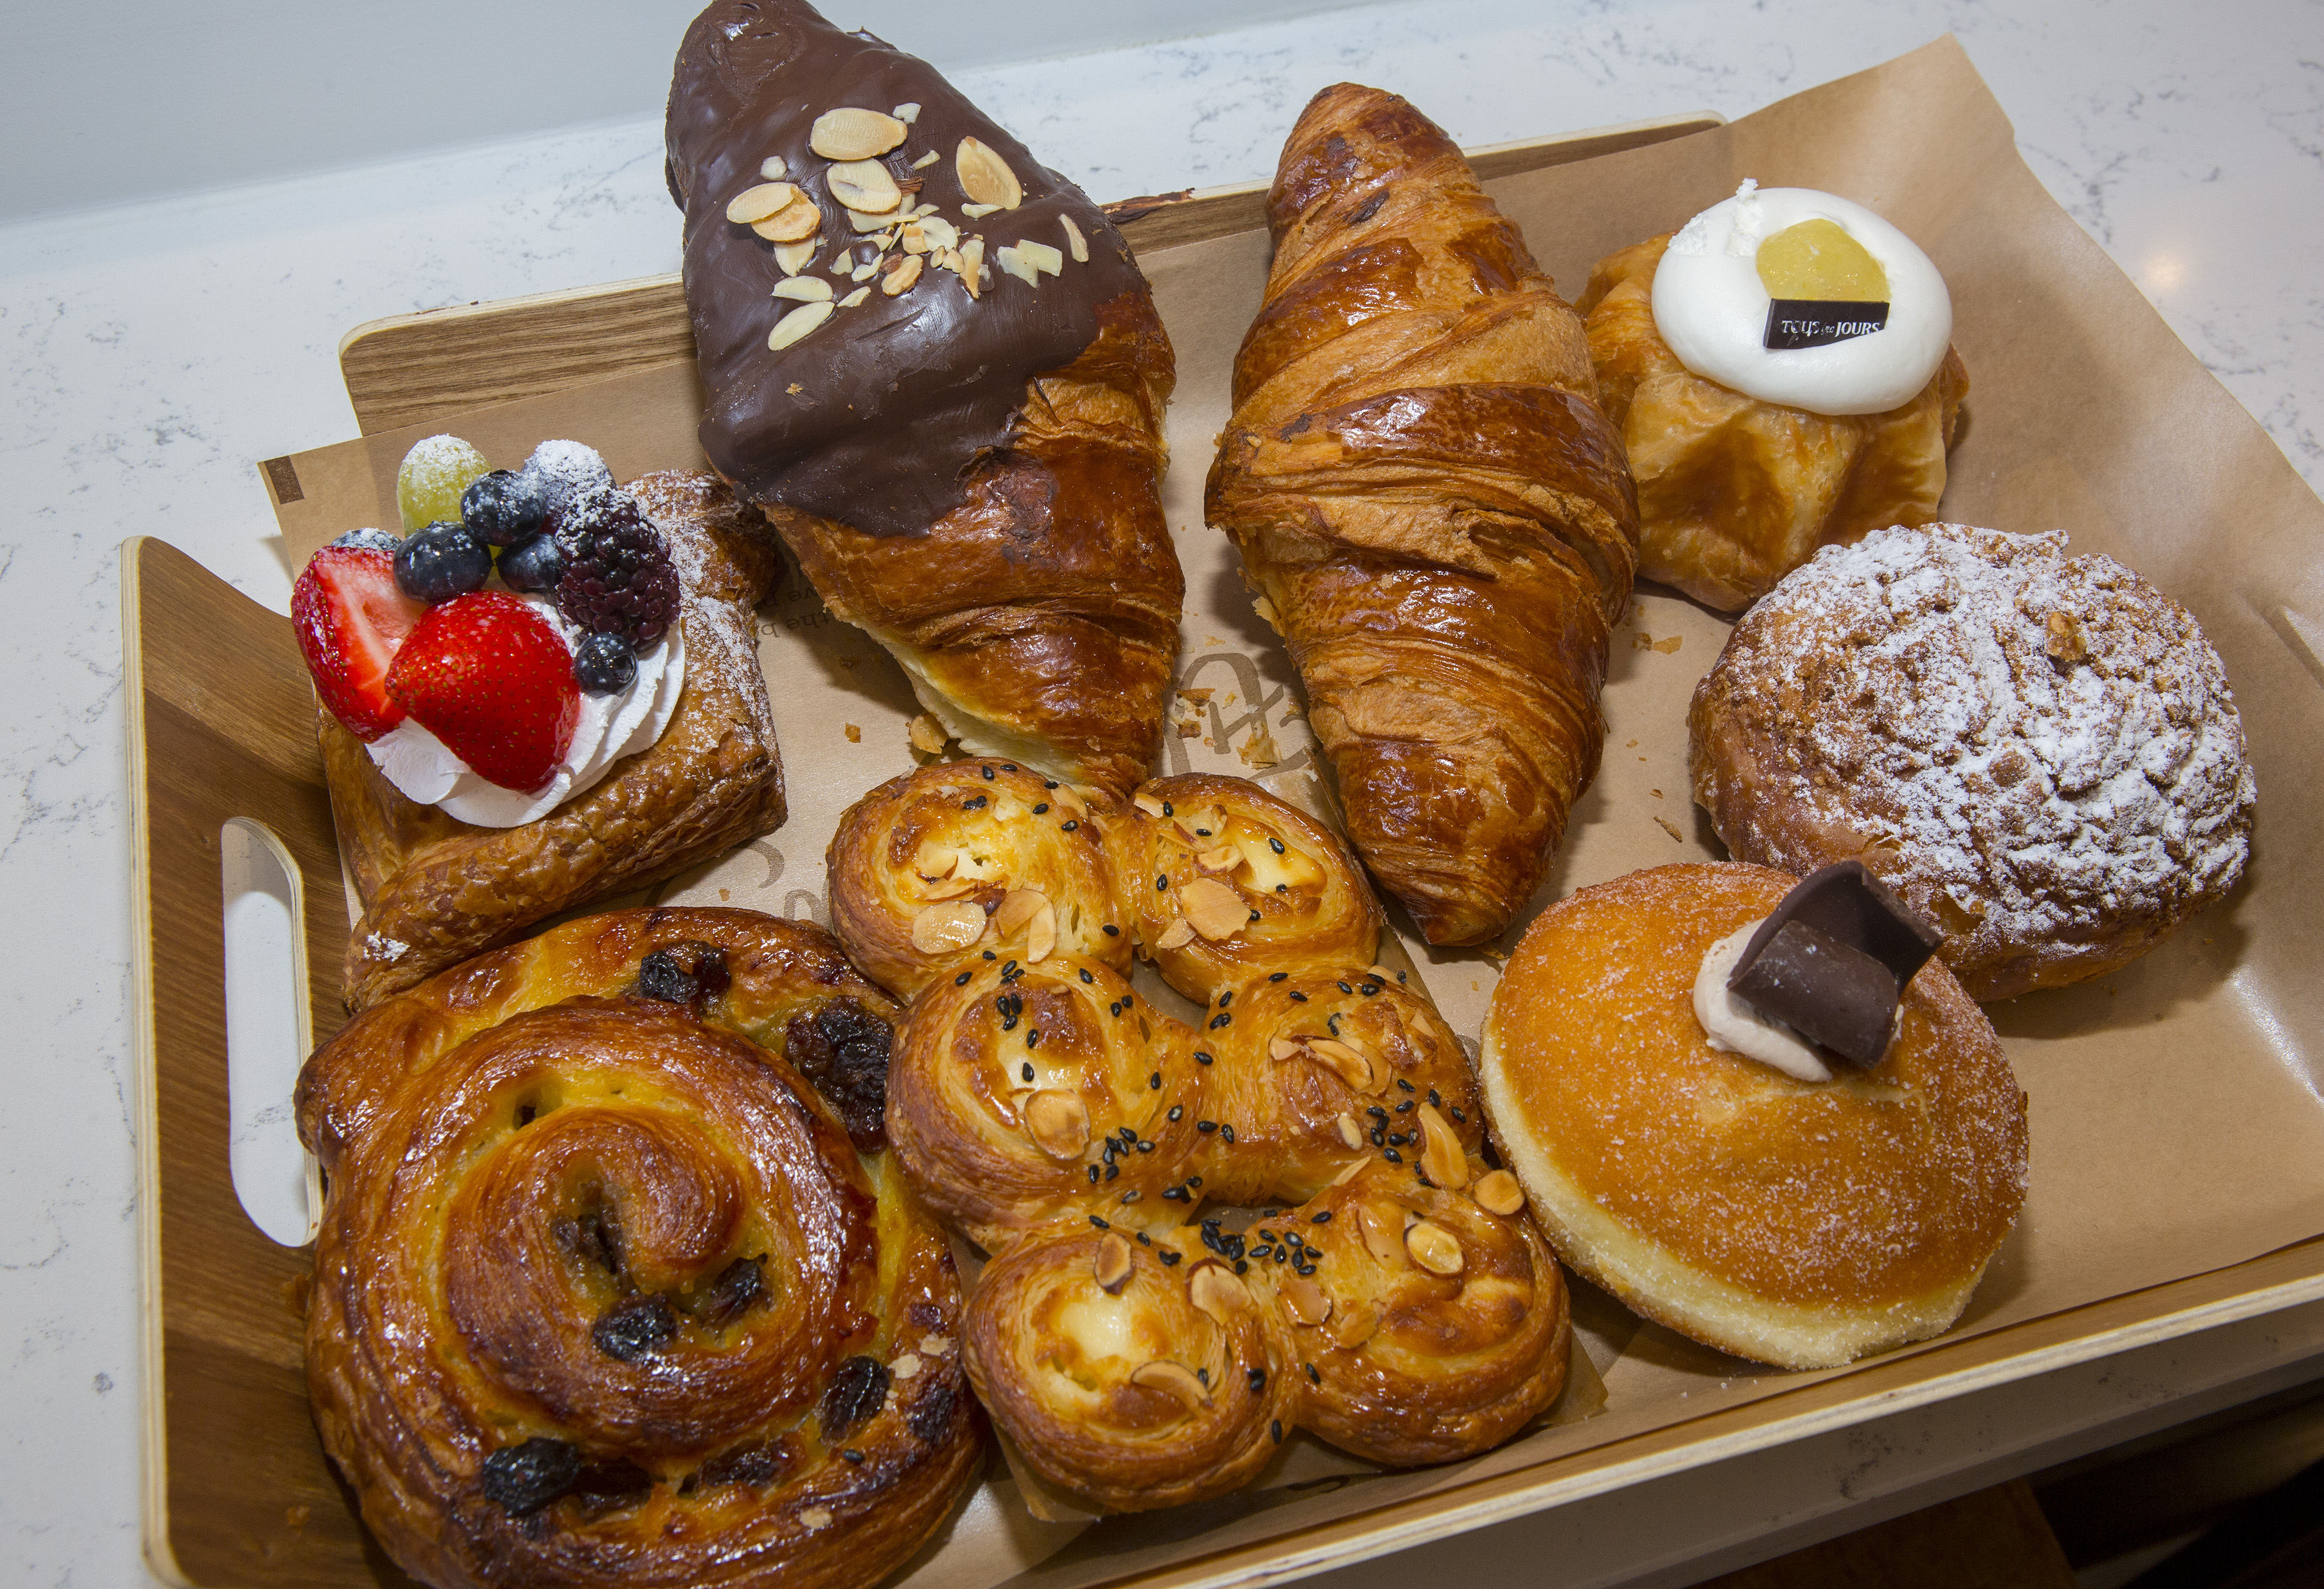 A tray filled with different pastries